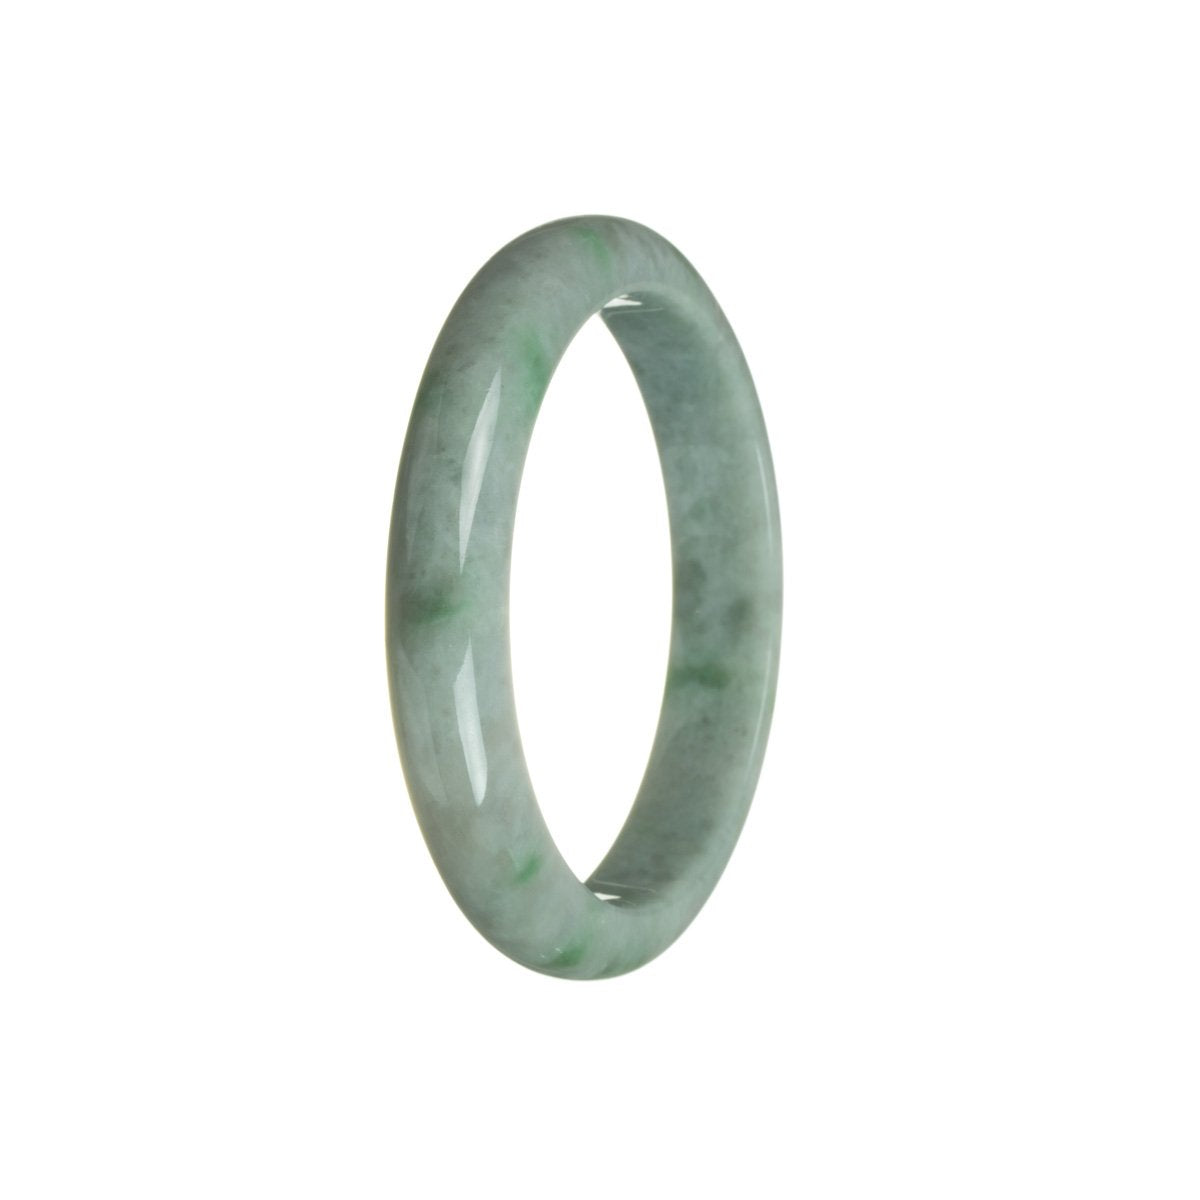 A close-up photo of a beautiful grey and green jadeite bracelet, featuring a half-moon shape. The bracelet has a high quality and is made with genuine grade A jadeite. It measures 57mm in size and is perfect for adding an elegant touch to any outfit. This bracelet is a stunning accessory from the brand MAYS.